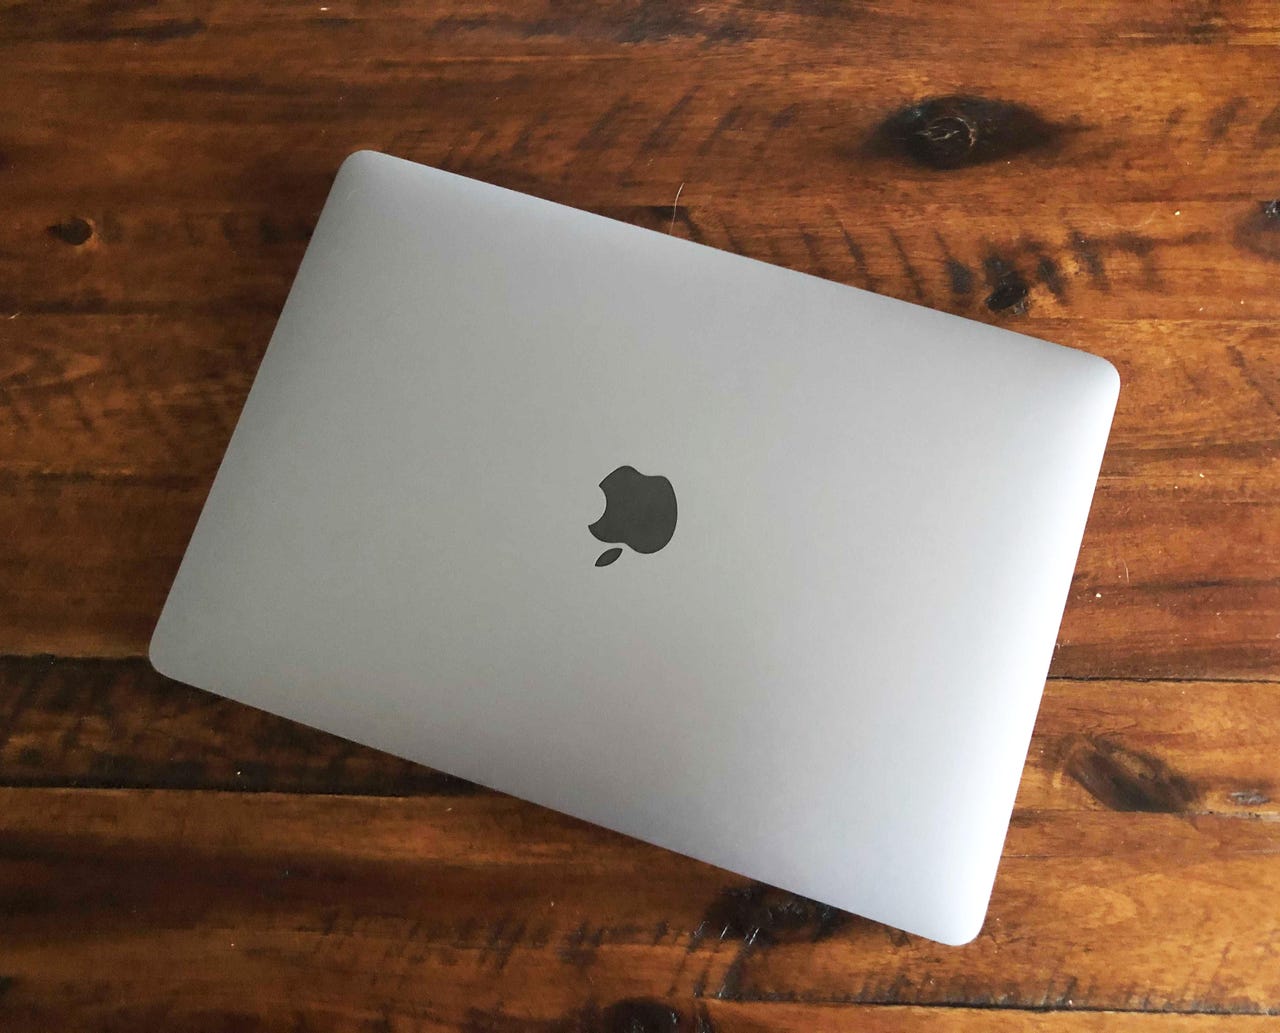 MacBook Air 2020 M1 Price, Release Date, and Specs